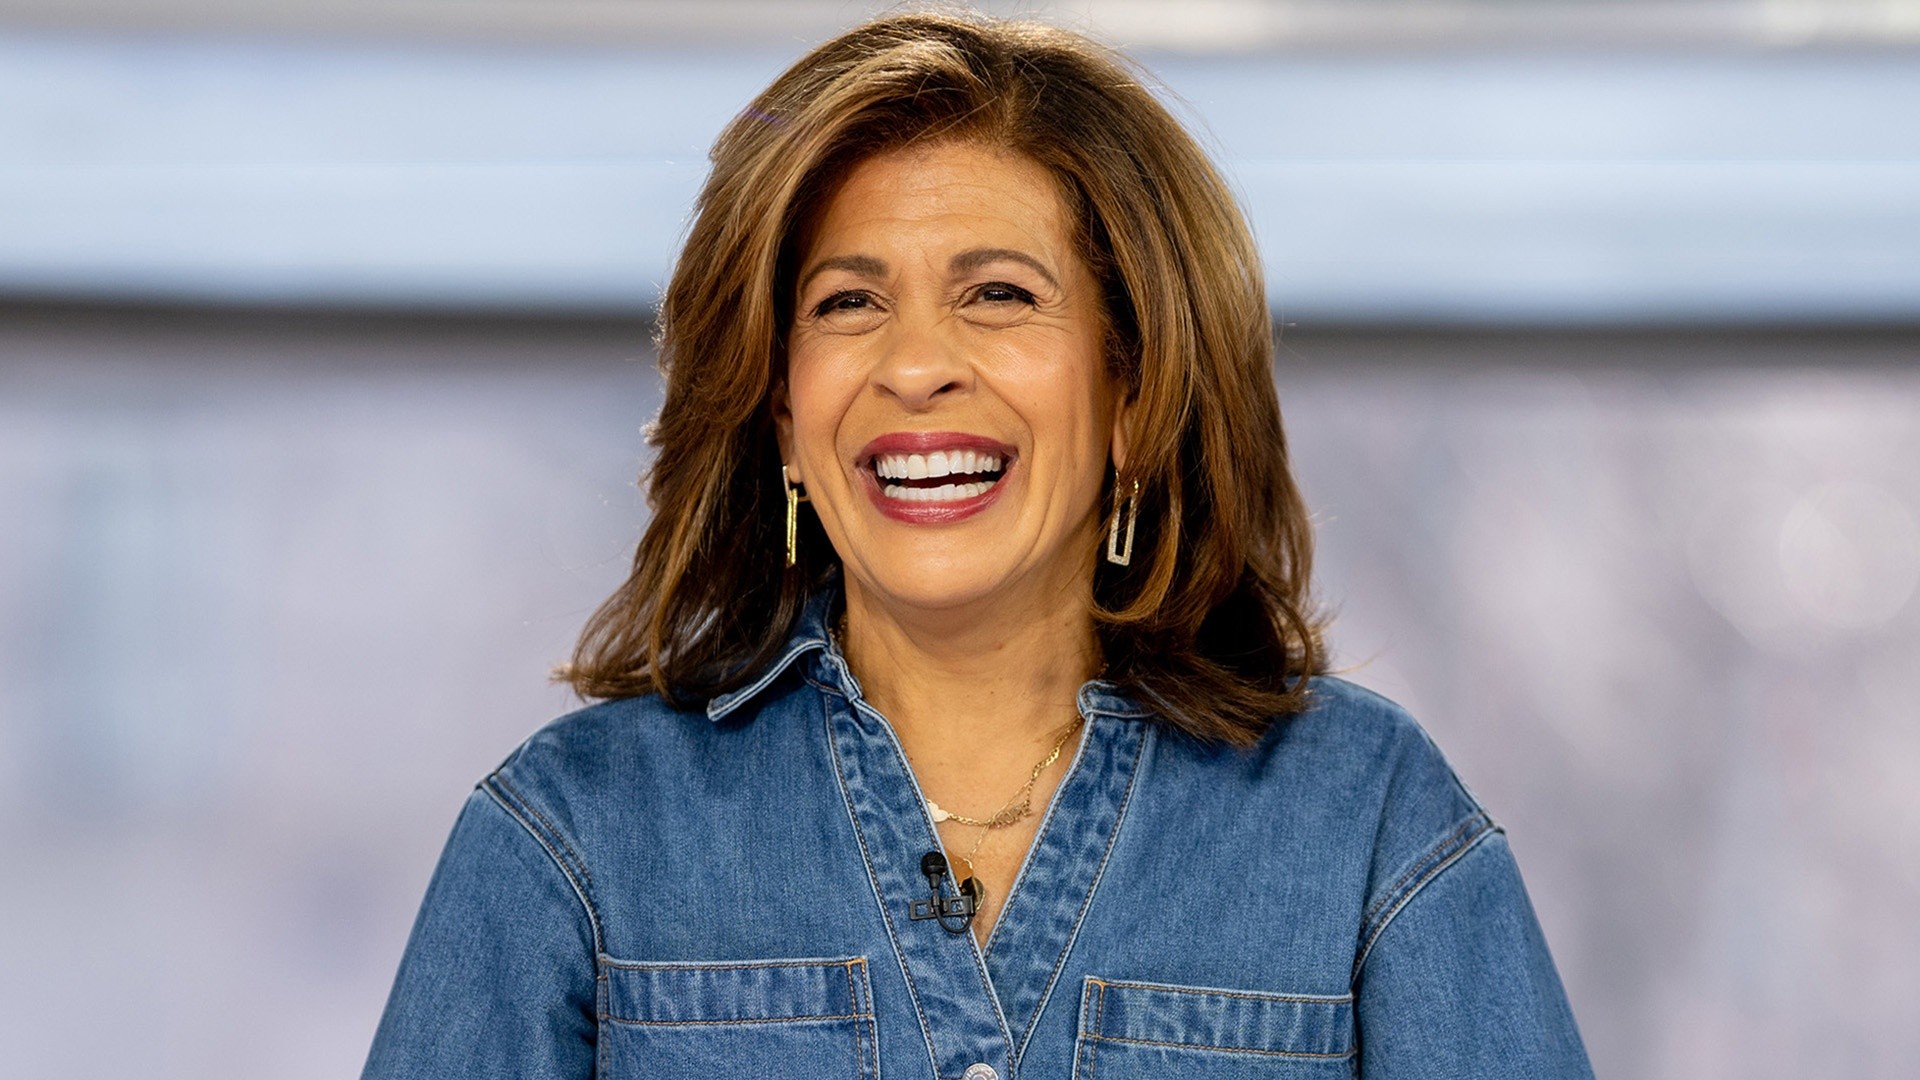 Hoda opens up about her family in new People spread